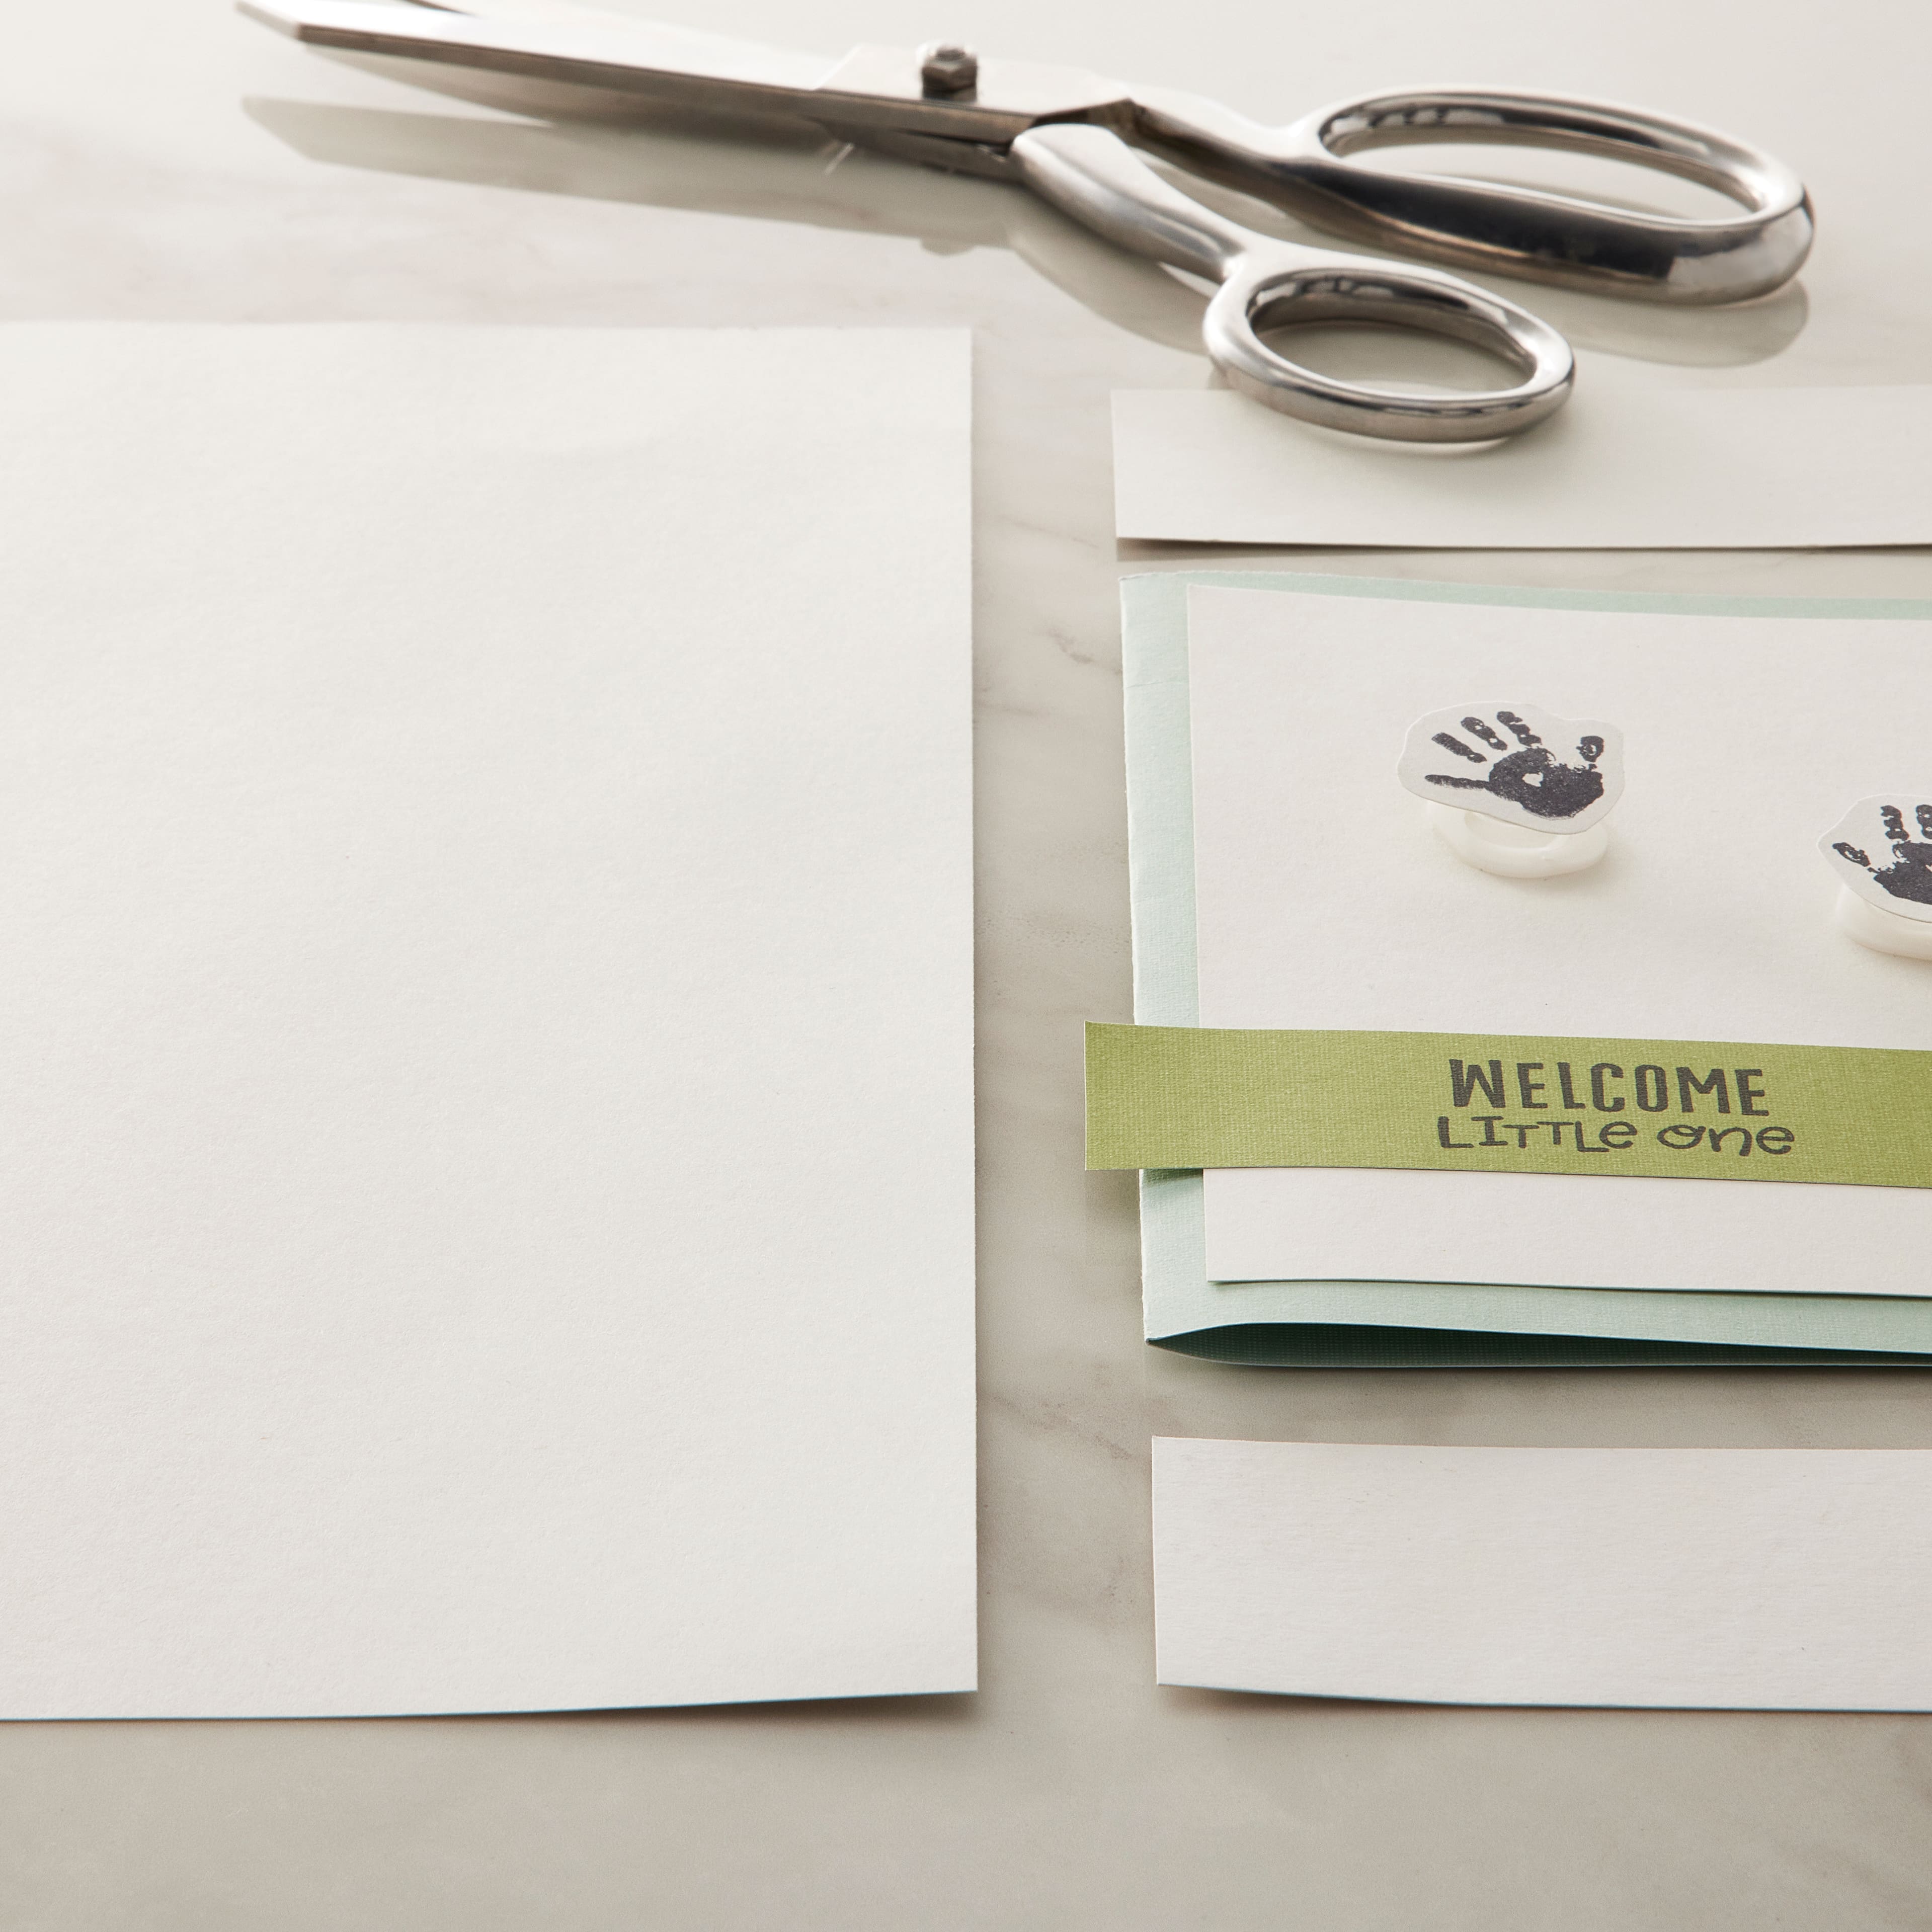 Smooth Solid Cardstock Paper by Recollections&#x2122;, 12&#x22; x 12&#x22;